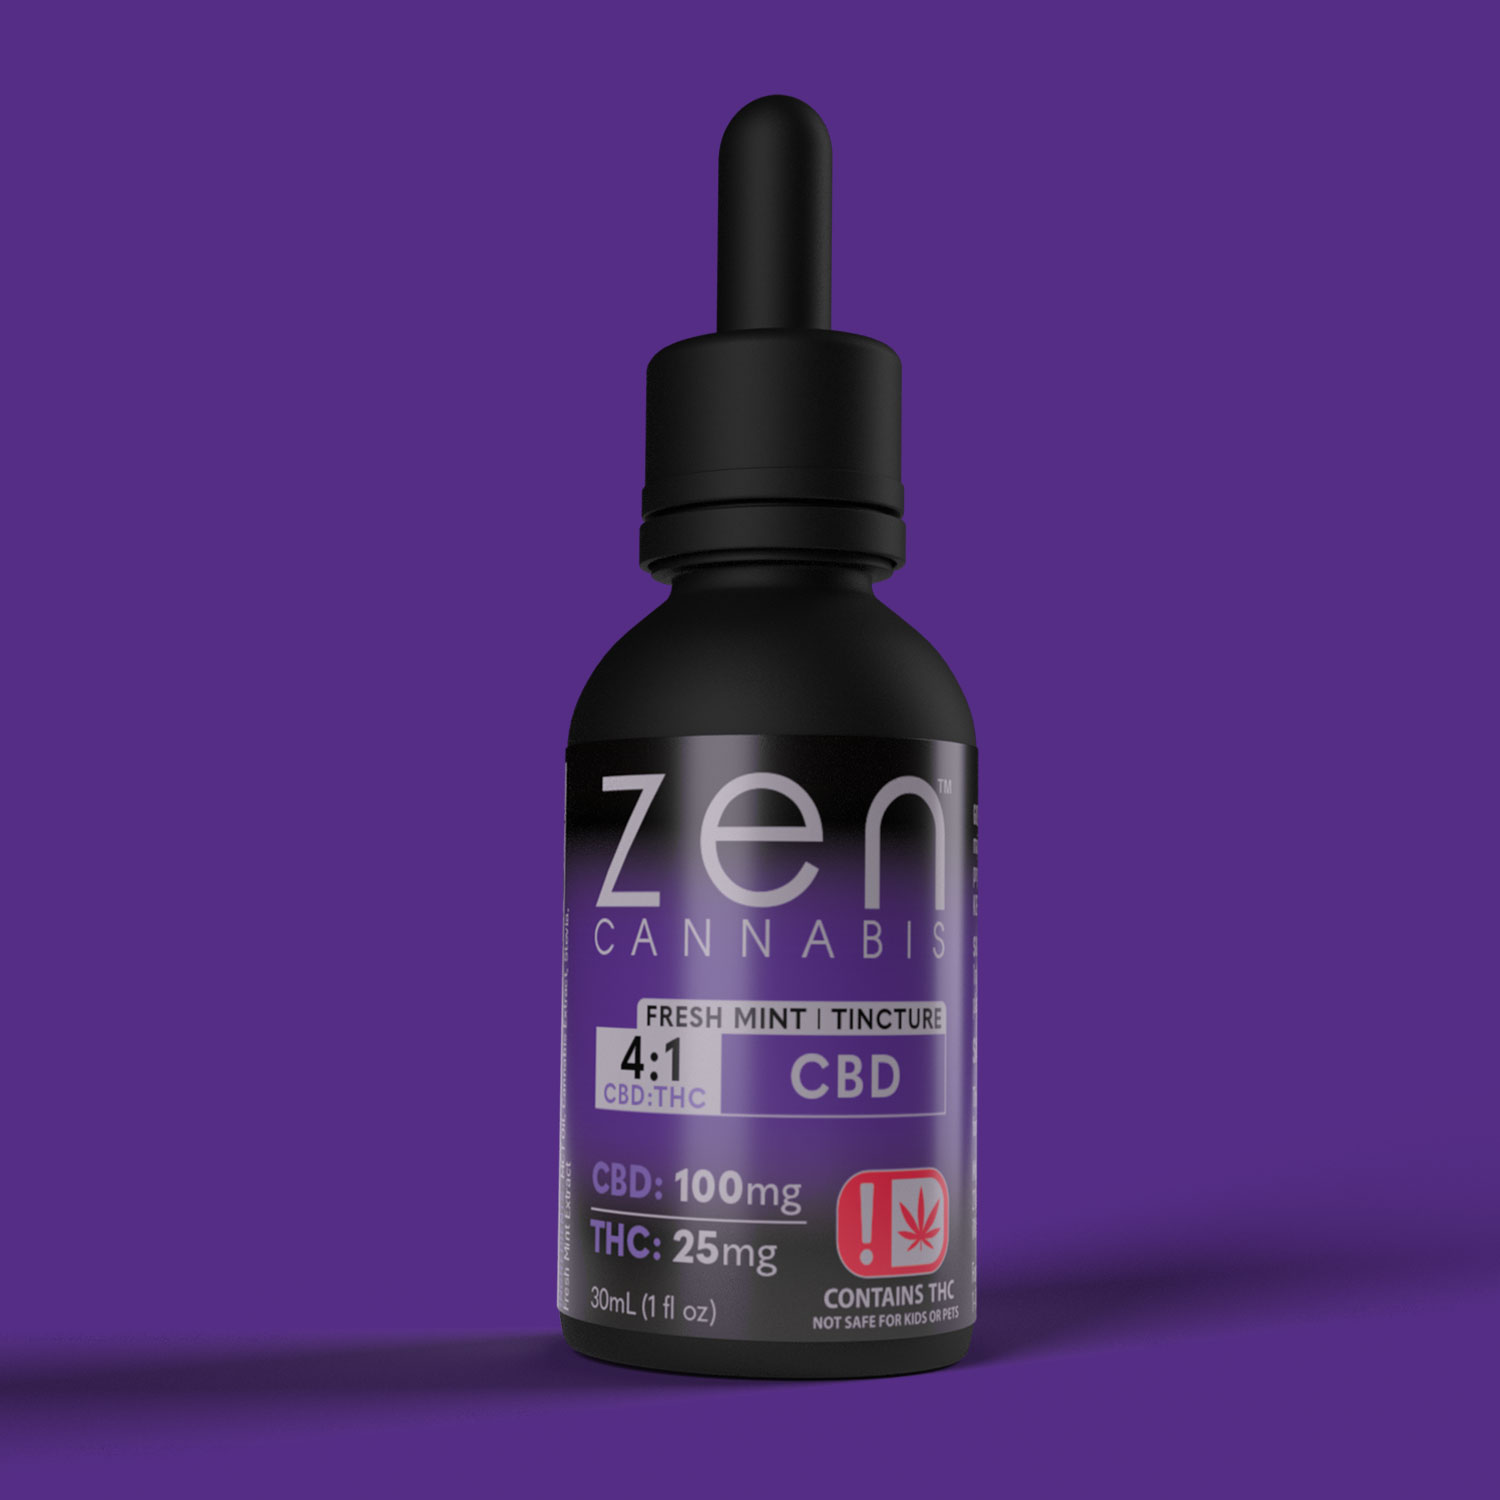 FRESH MINT
25mg THC per bottle
100mg CBD per bottle
Bursting with fresh mint flavor, Zen Cannabis CBD tincture provides relief to your body and mind. This CBD-heavy tincture will keep you alert, relaxed and in control. 
25mg THC | 100mg CBD
1oz (30ml)